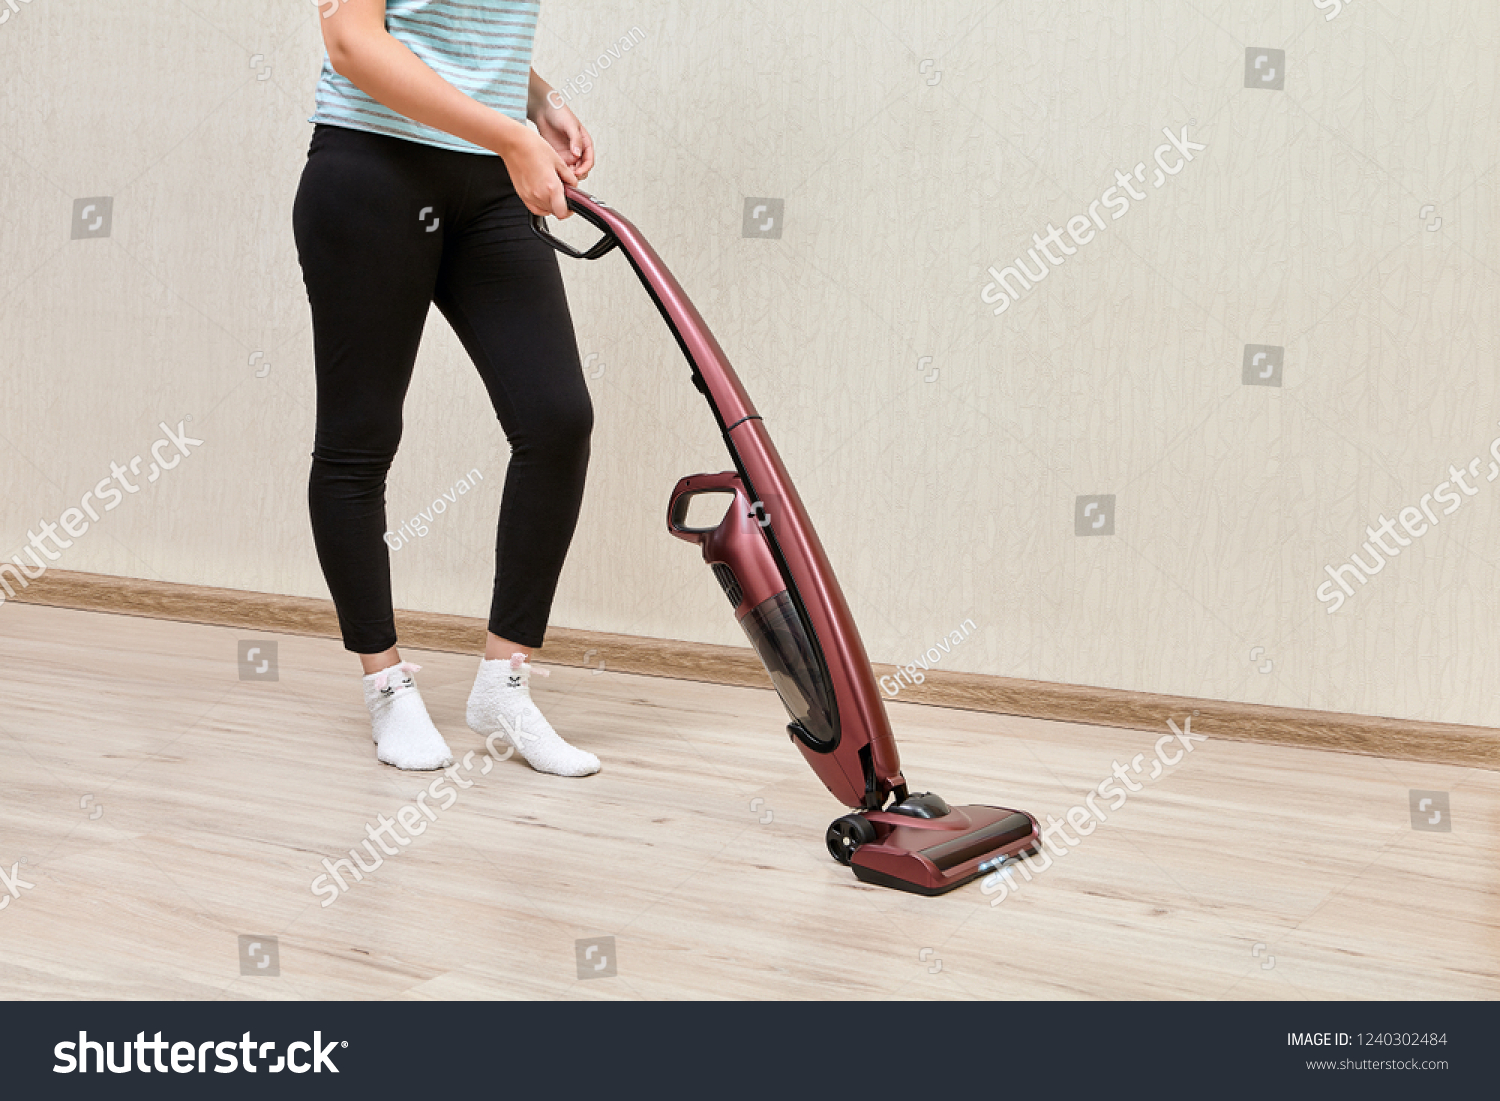 Cleaning woman in black leggins is vacuuming with help of upright vacuum cleaner with led lights on. #1240302484